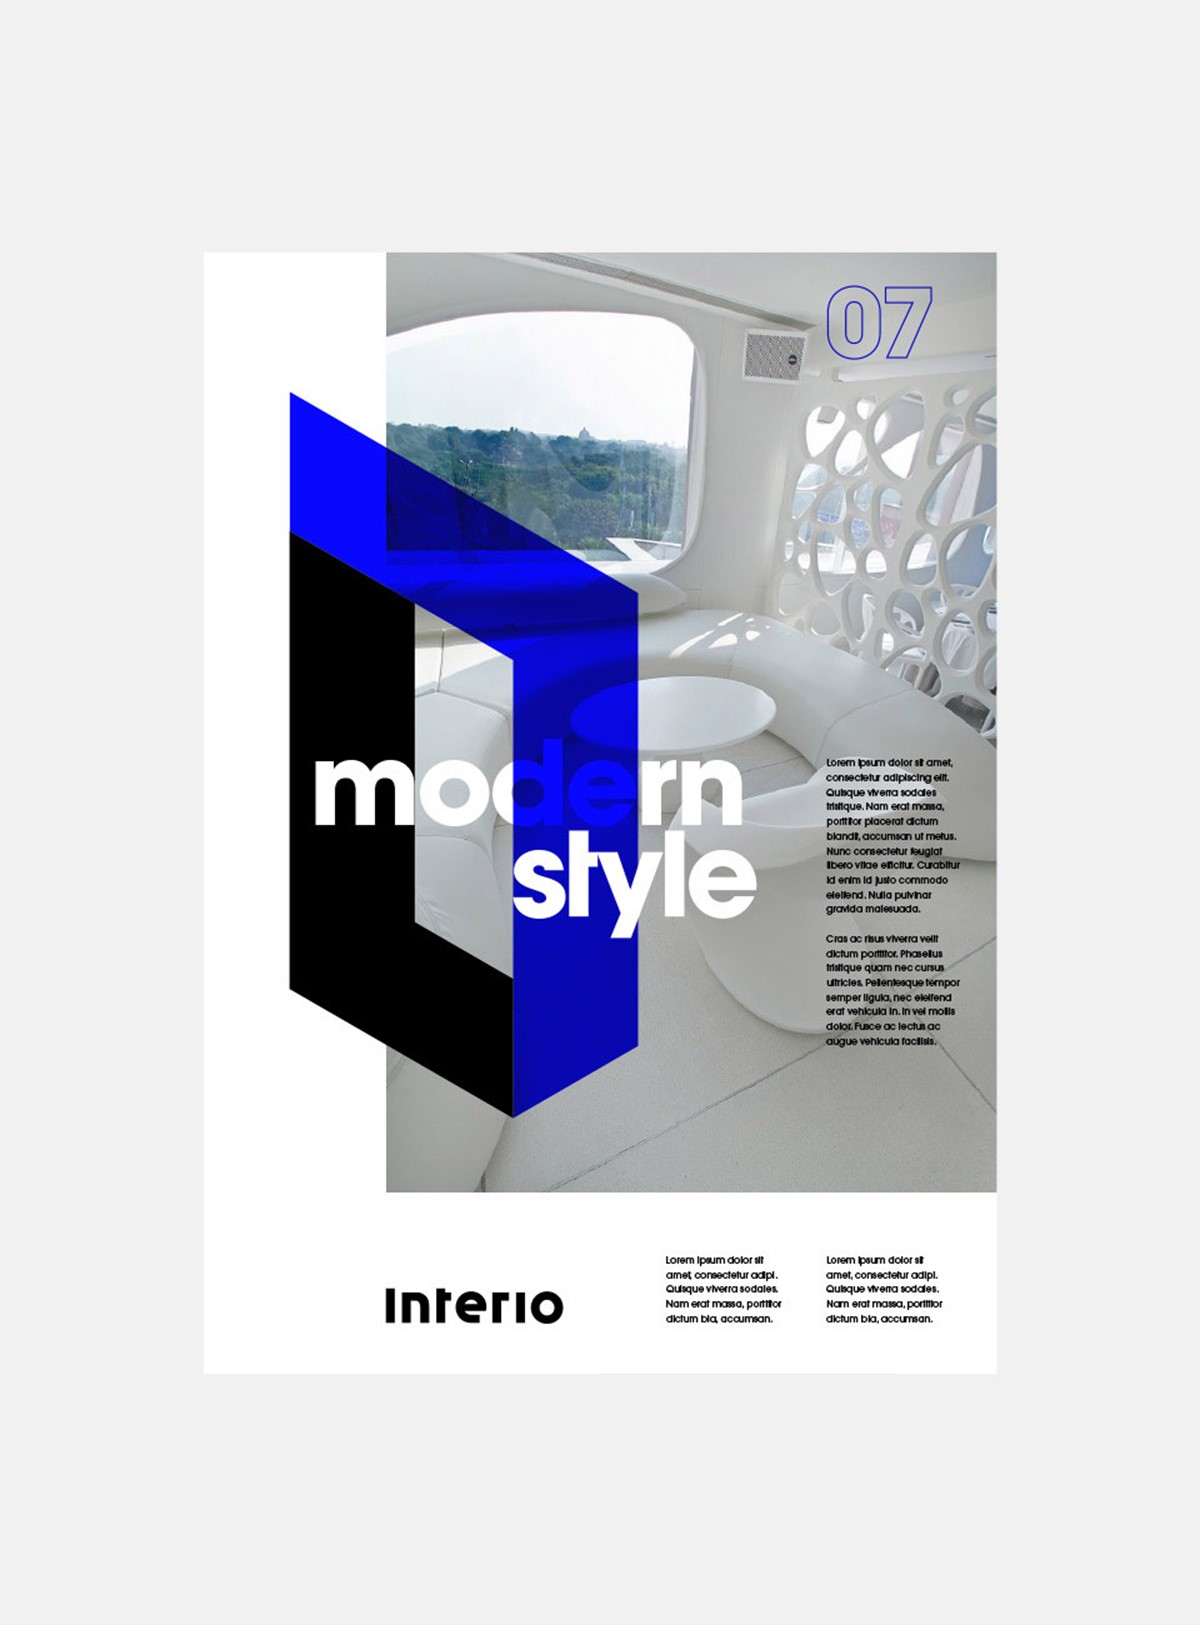 Interio. Brochure layout mock-up. Bespoke typographic identity design by Superfried.